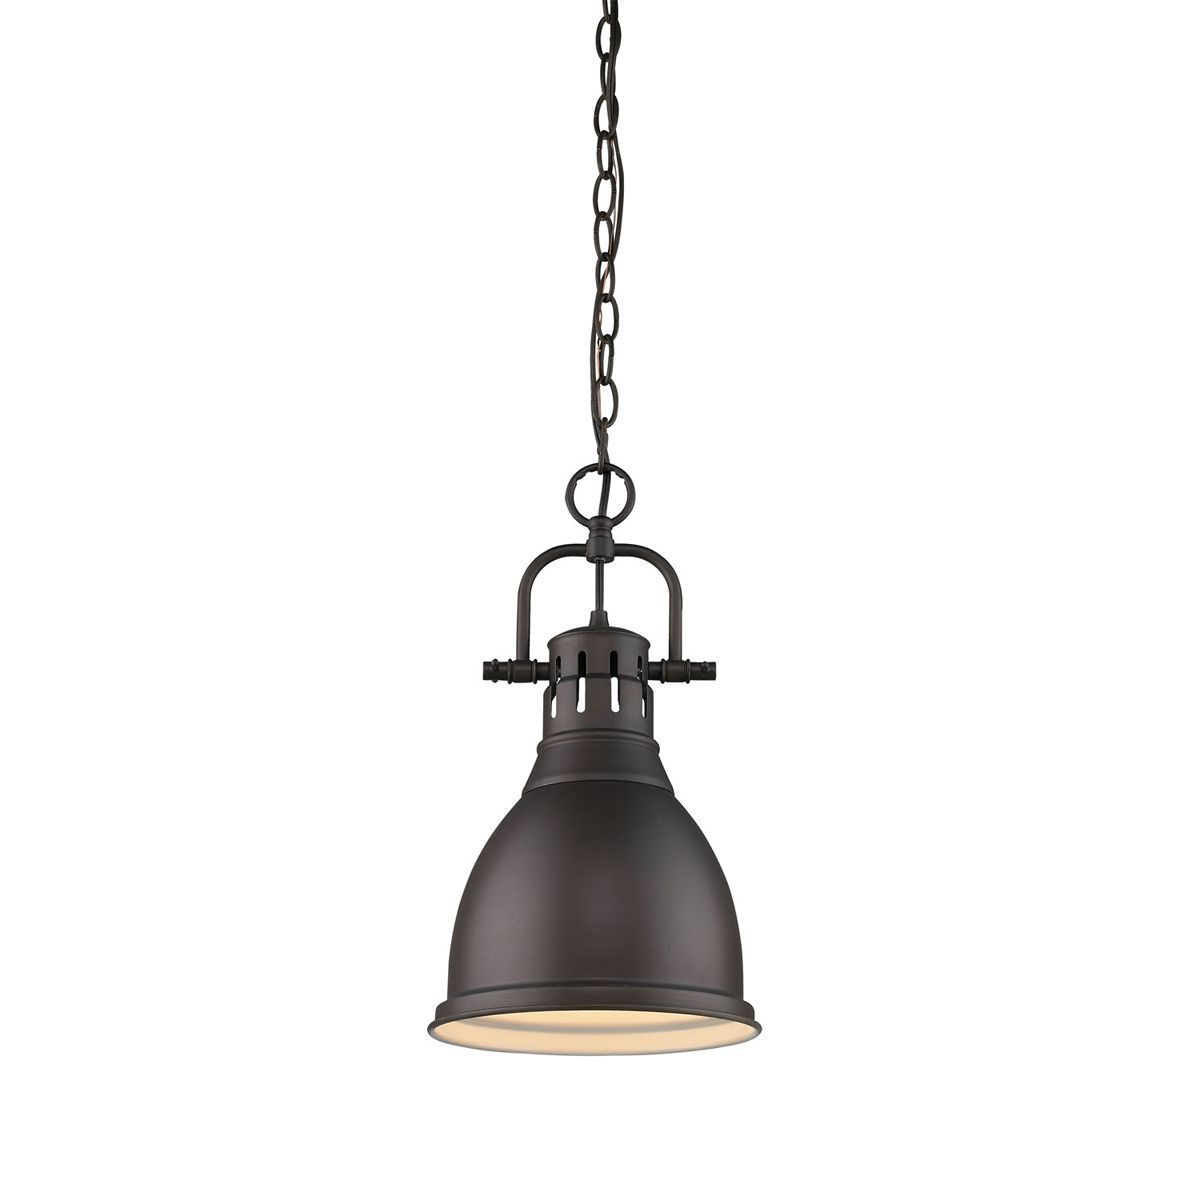 Pendant Pertaining To Well Known Bodalla 1 Light Single Dome Pendants (View 25 of 25)